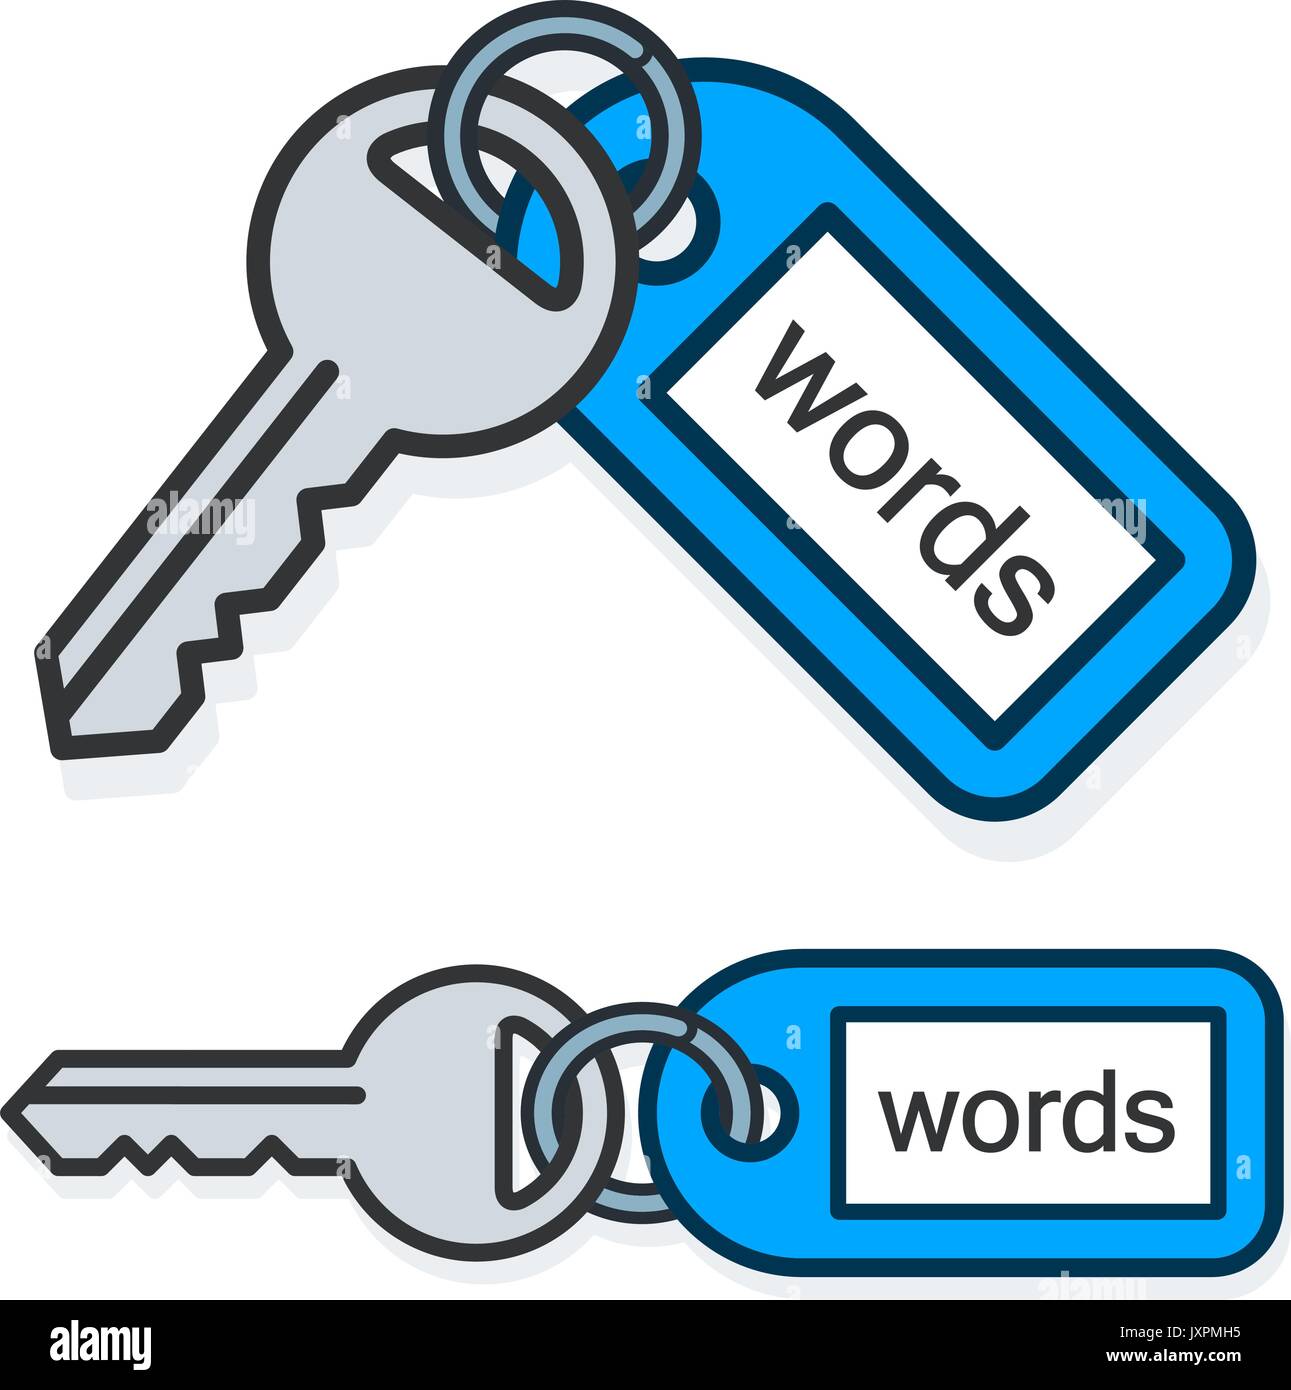 Keywords concept of metallic keys connected to tag with the same name text over white background Stock Vector